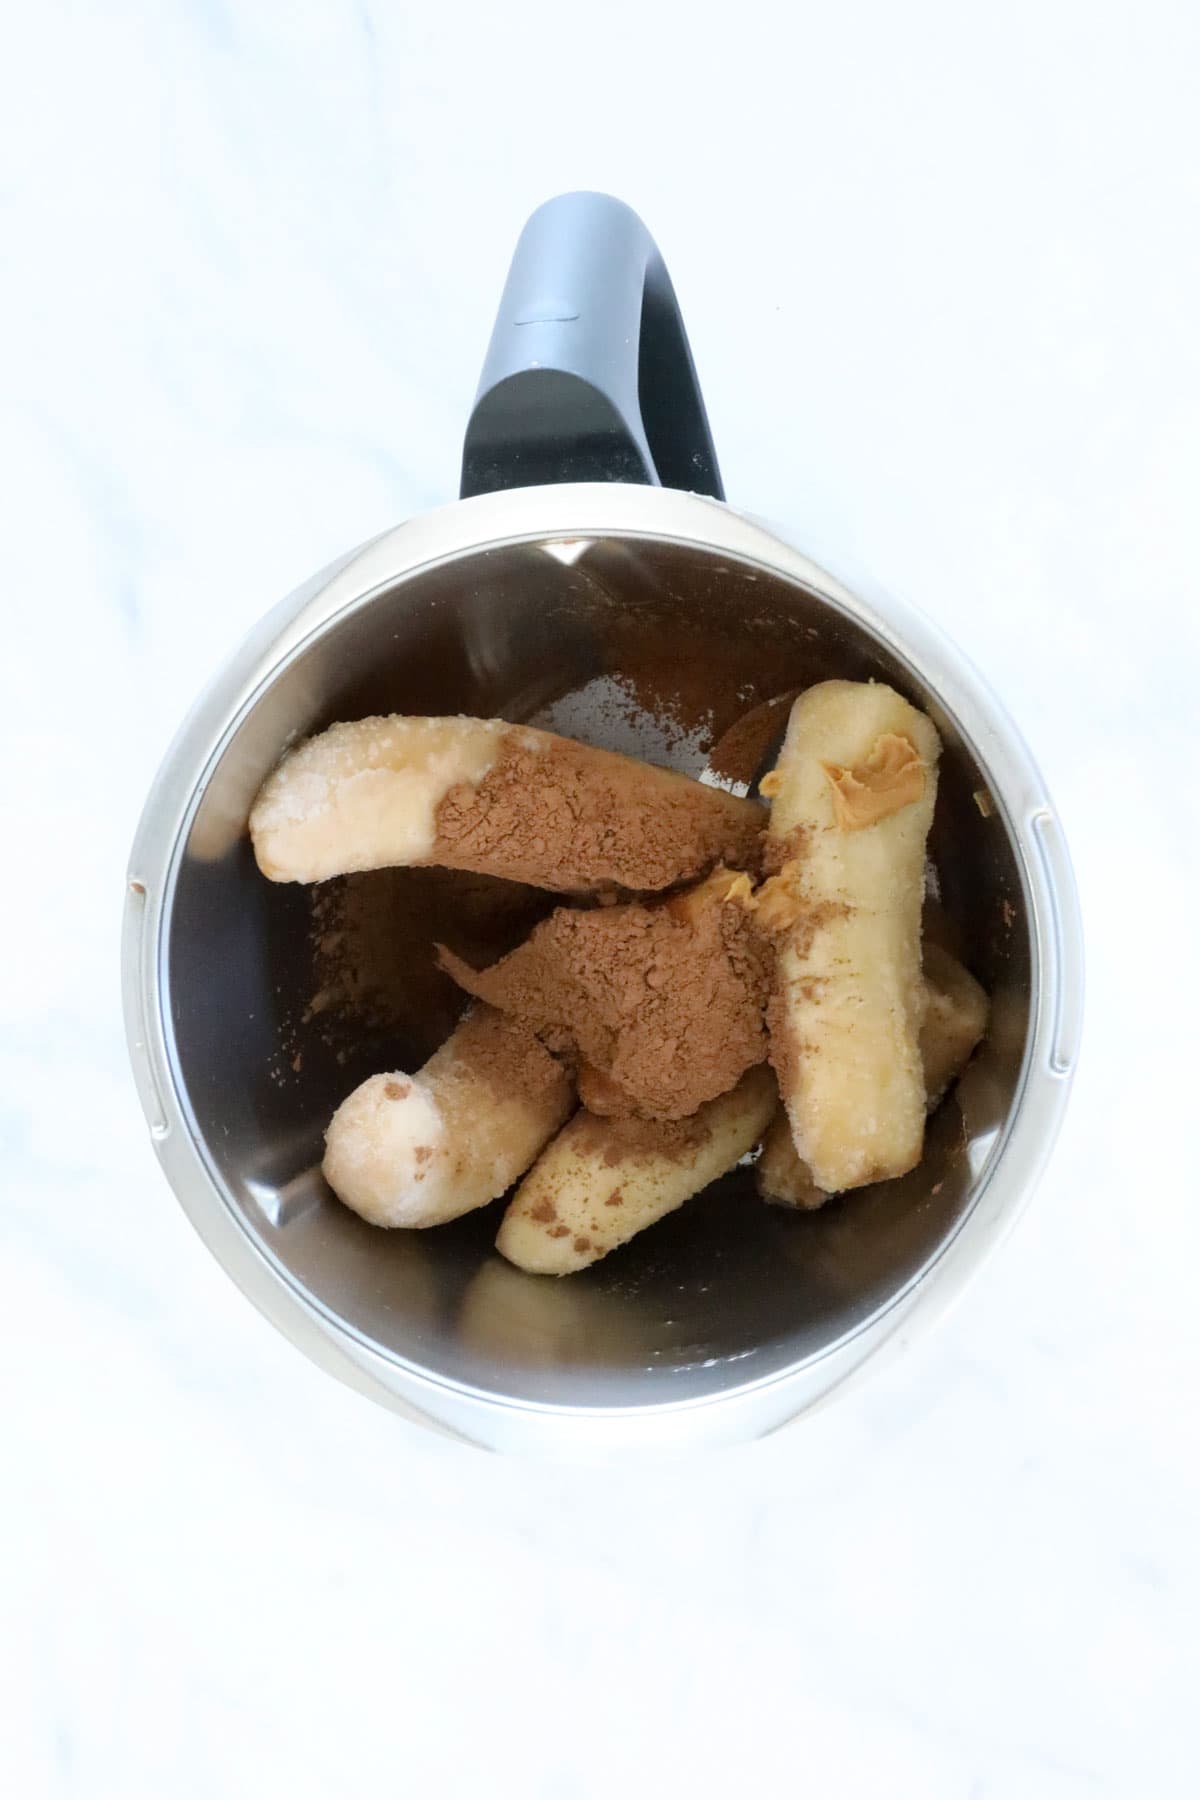 Frozen bananas, cocoa and peanut butter in a Thermomix.